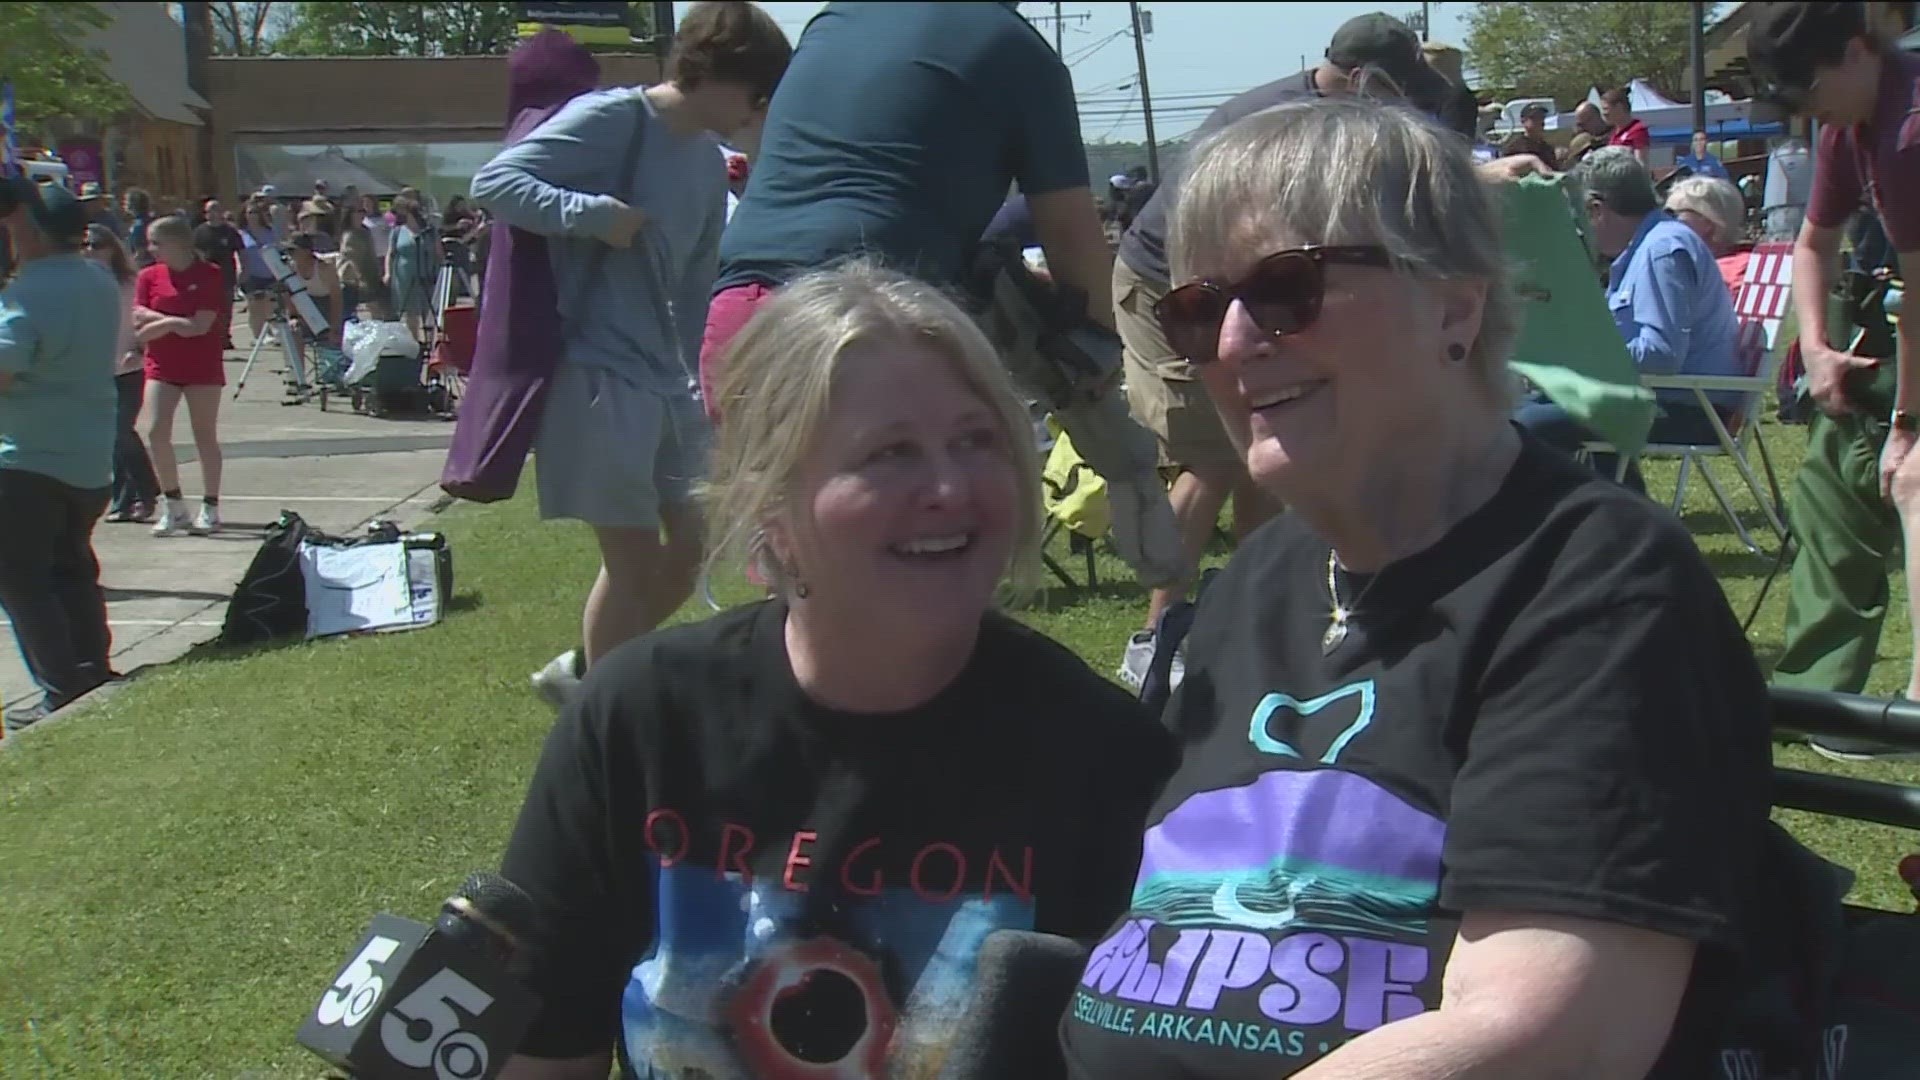 Spidell and Kane joined crowds of people from around the world who flocked to Russellville for the eclipse.